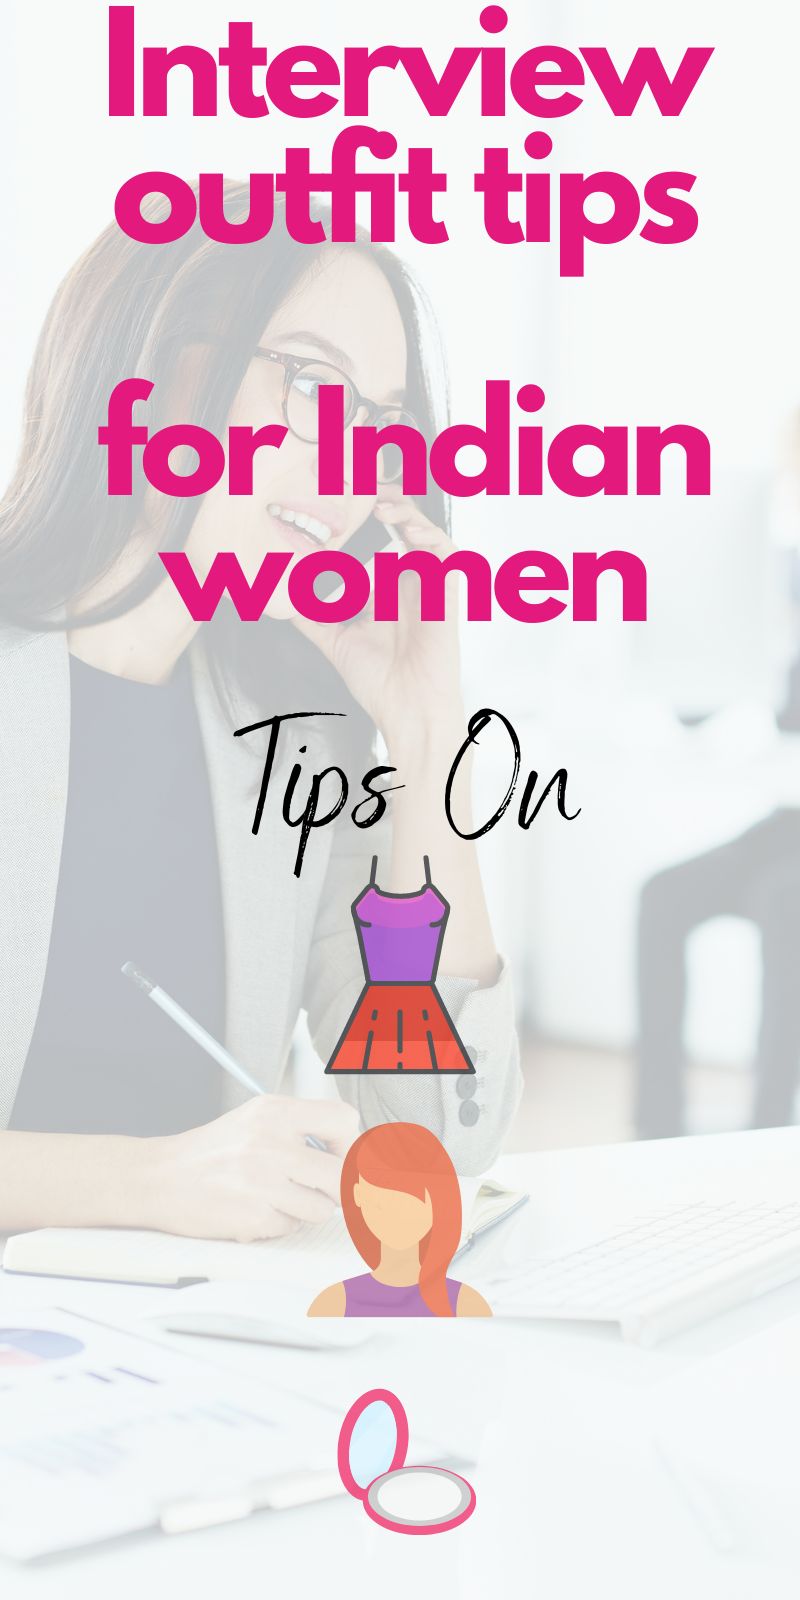 Interview outfits for Indian women - Real world tips